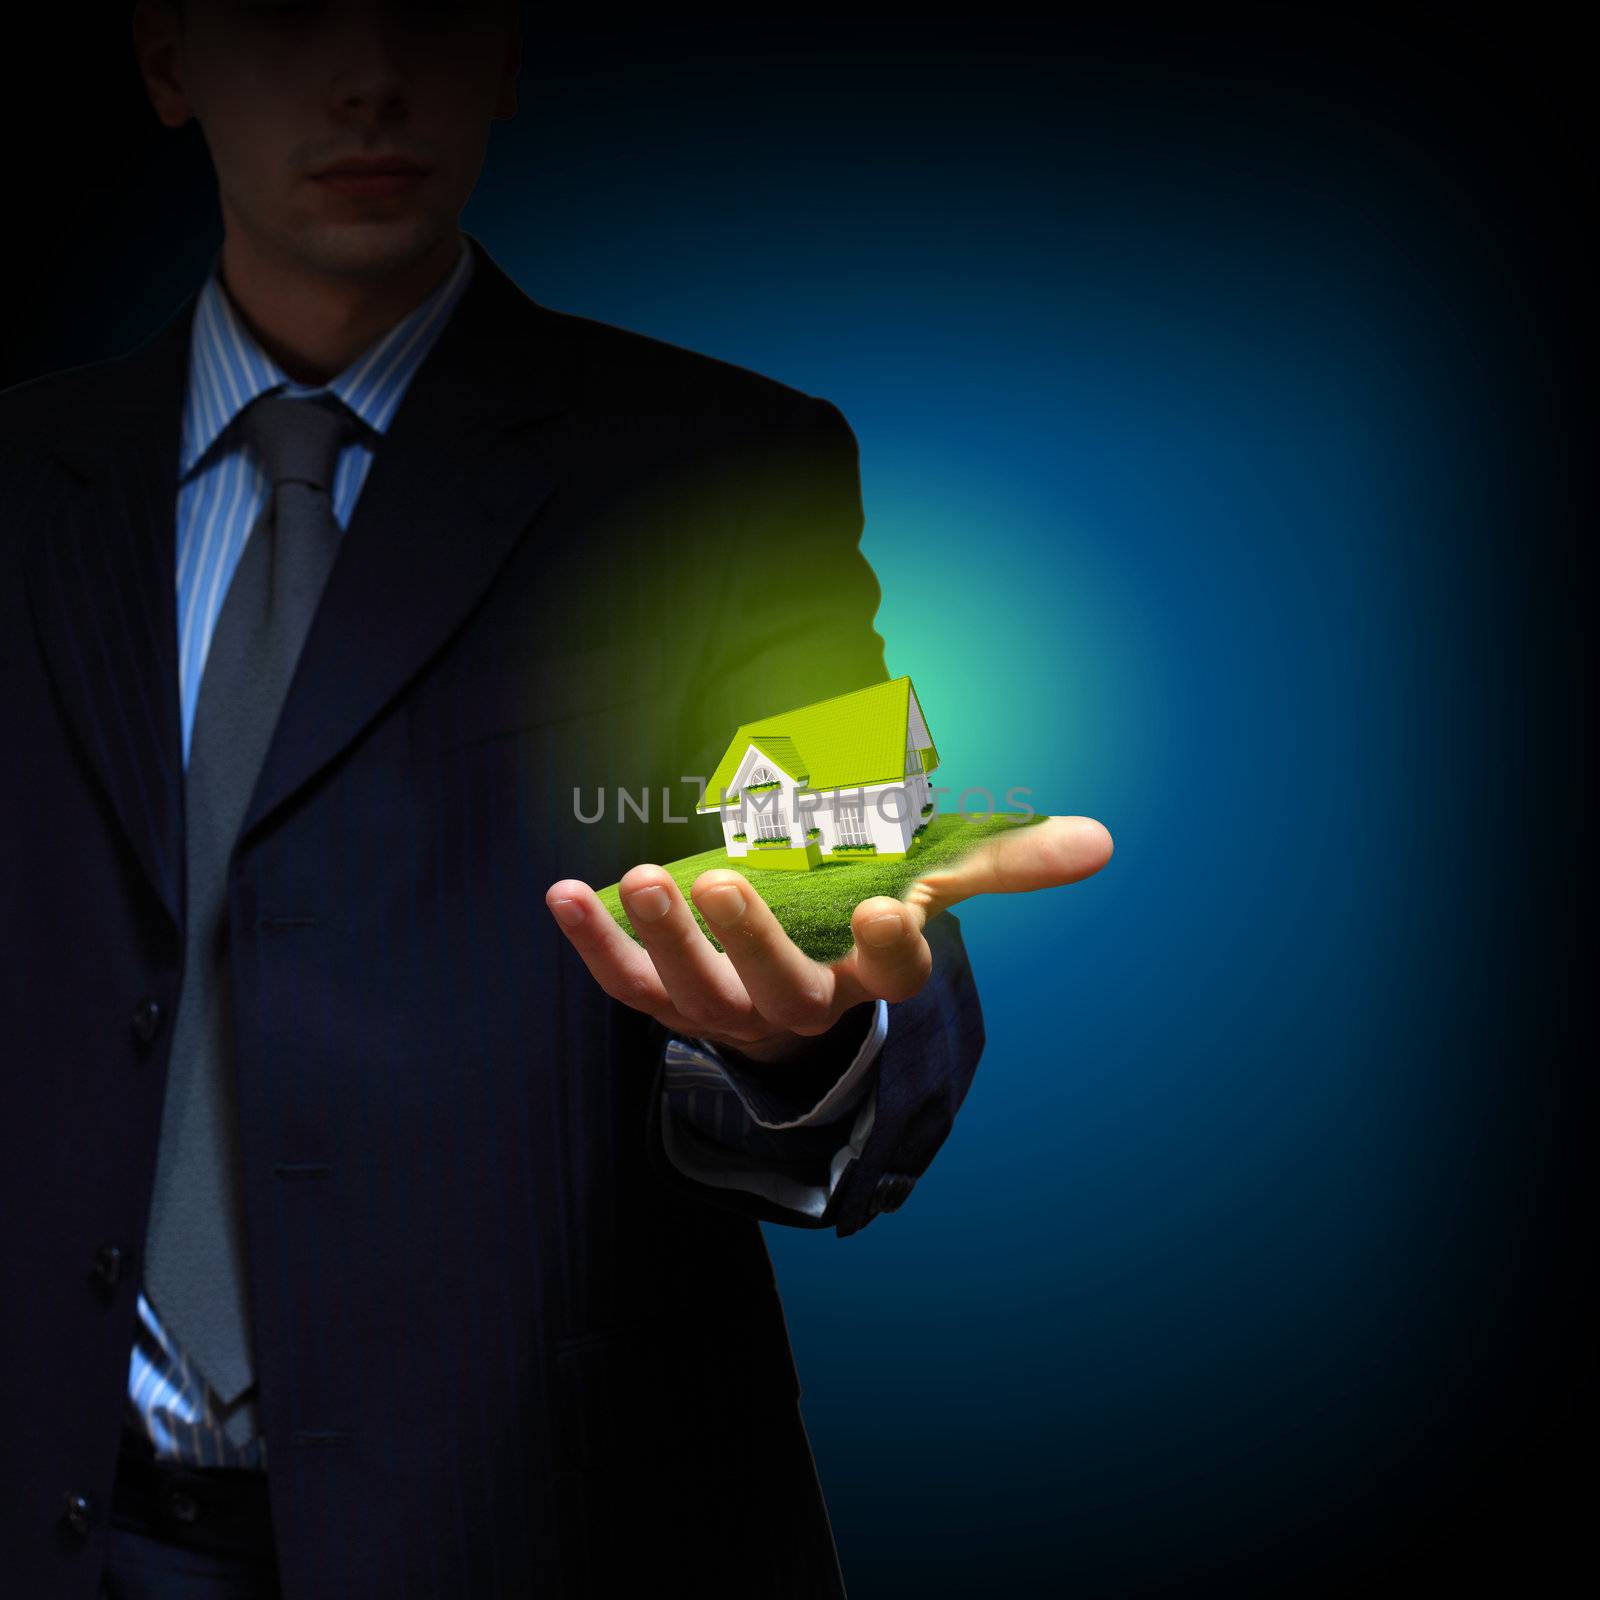 Residential building and a businessman holding it in his hands